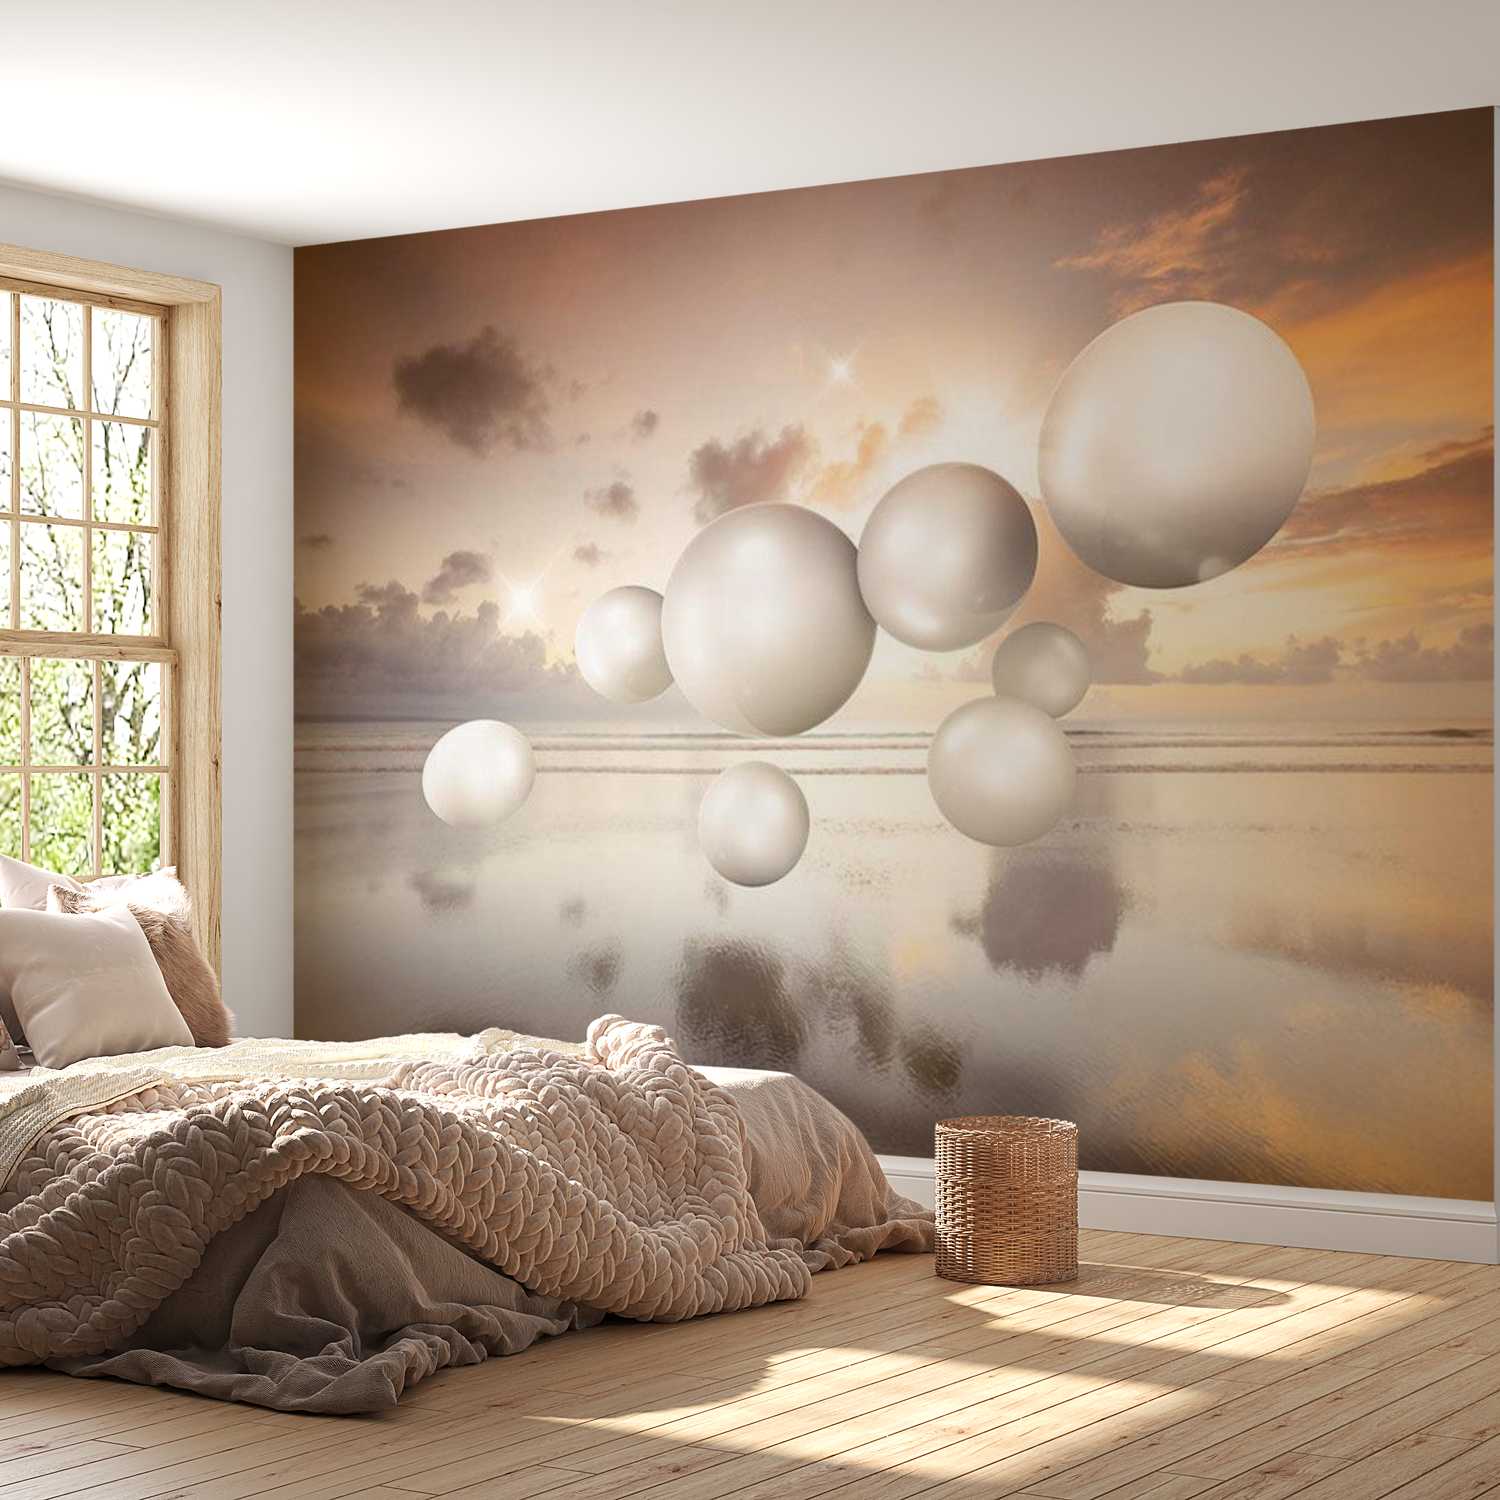 3D Illusion Wallpaper Wall Mural - Morning Jewels 39"Wx27"H